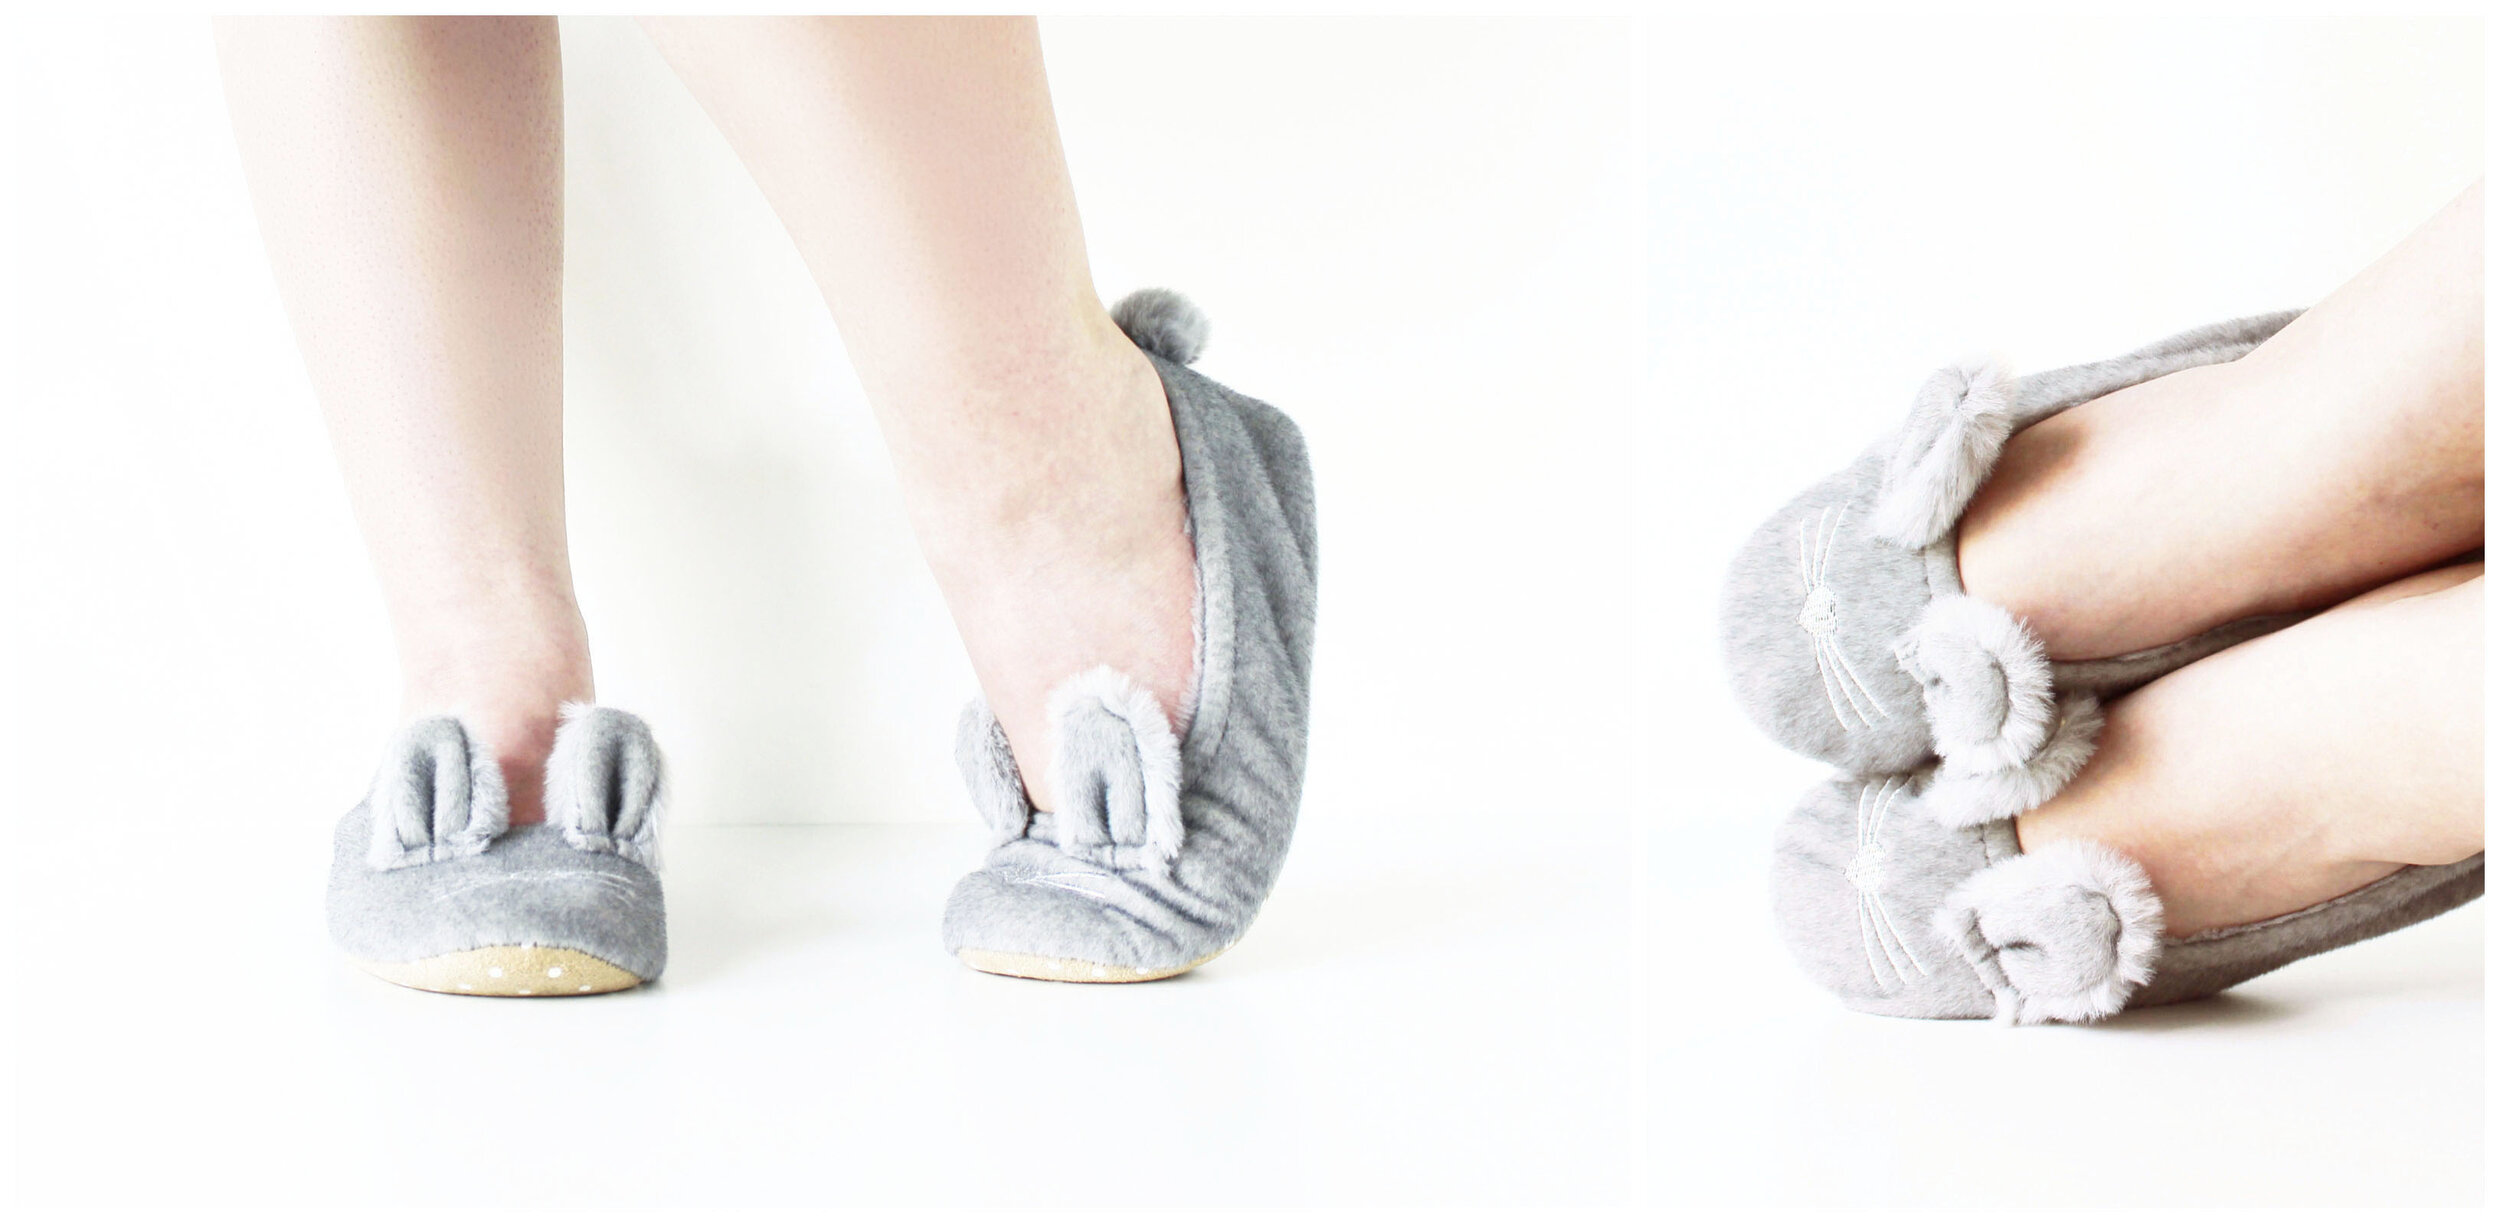 new look bunny slippers